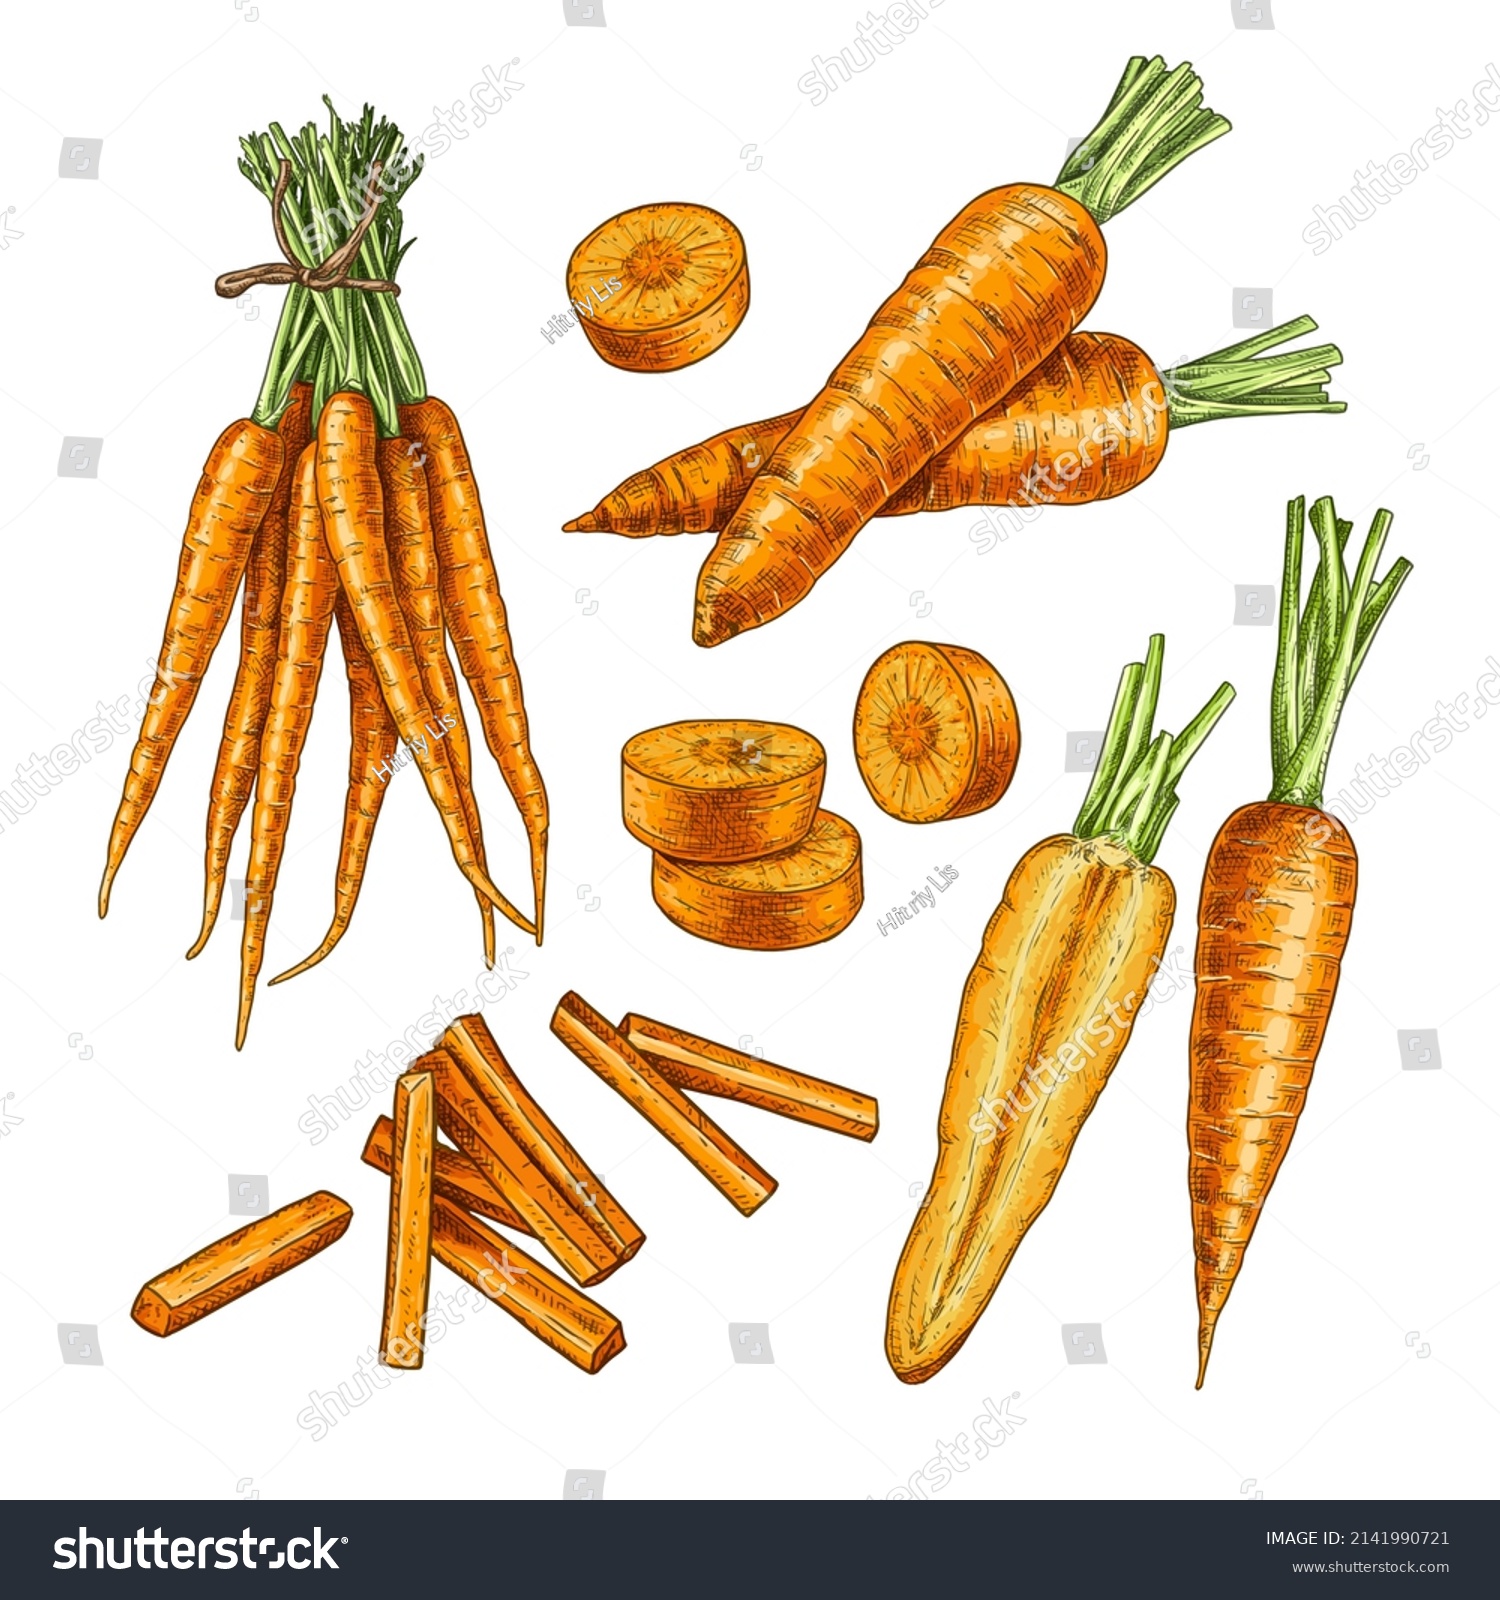 Hand drawn carrot. Set sketches with carrot bunch, whole and cut in half, cut into slices and strips. Vector illustration isolated on white background. #2141990721